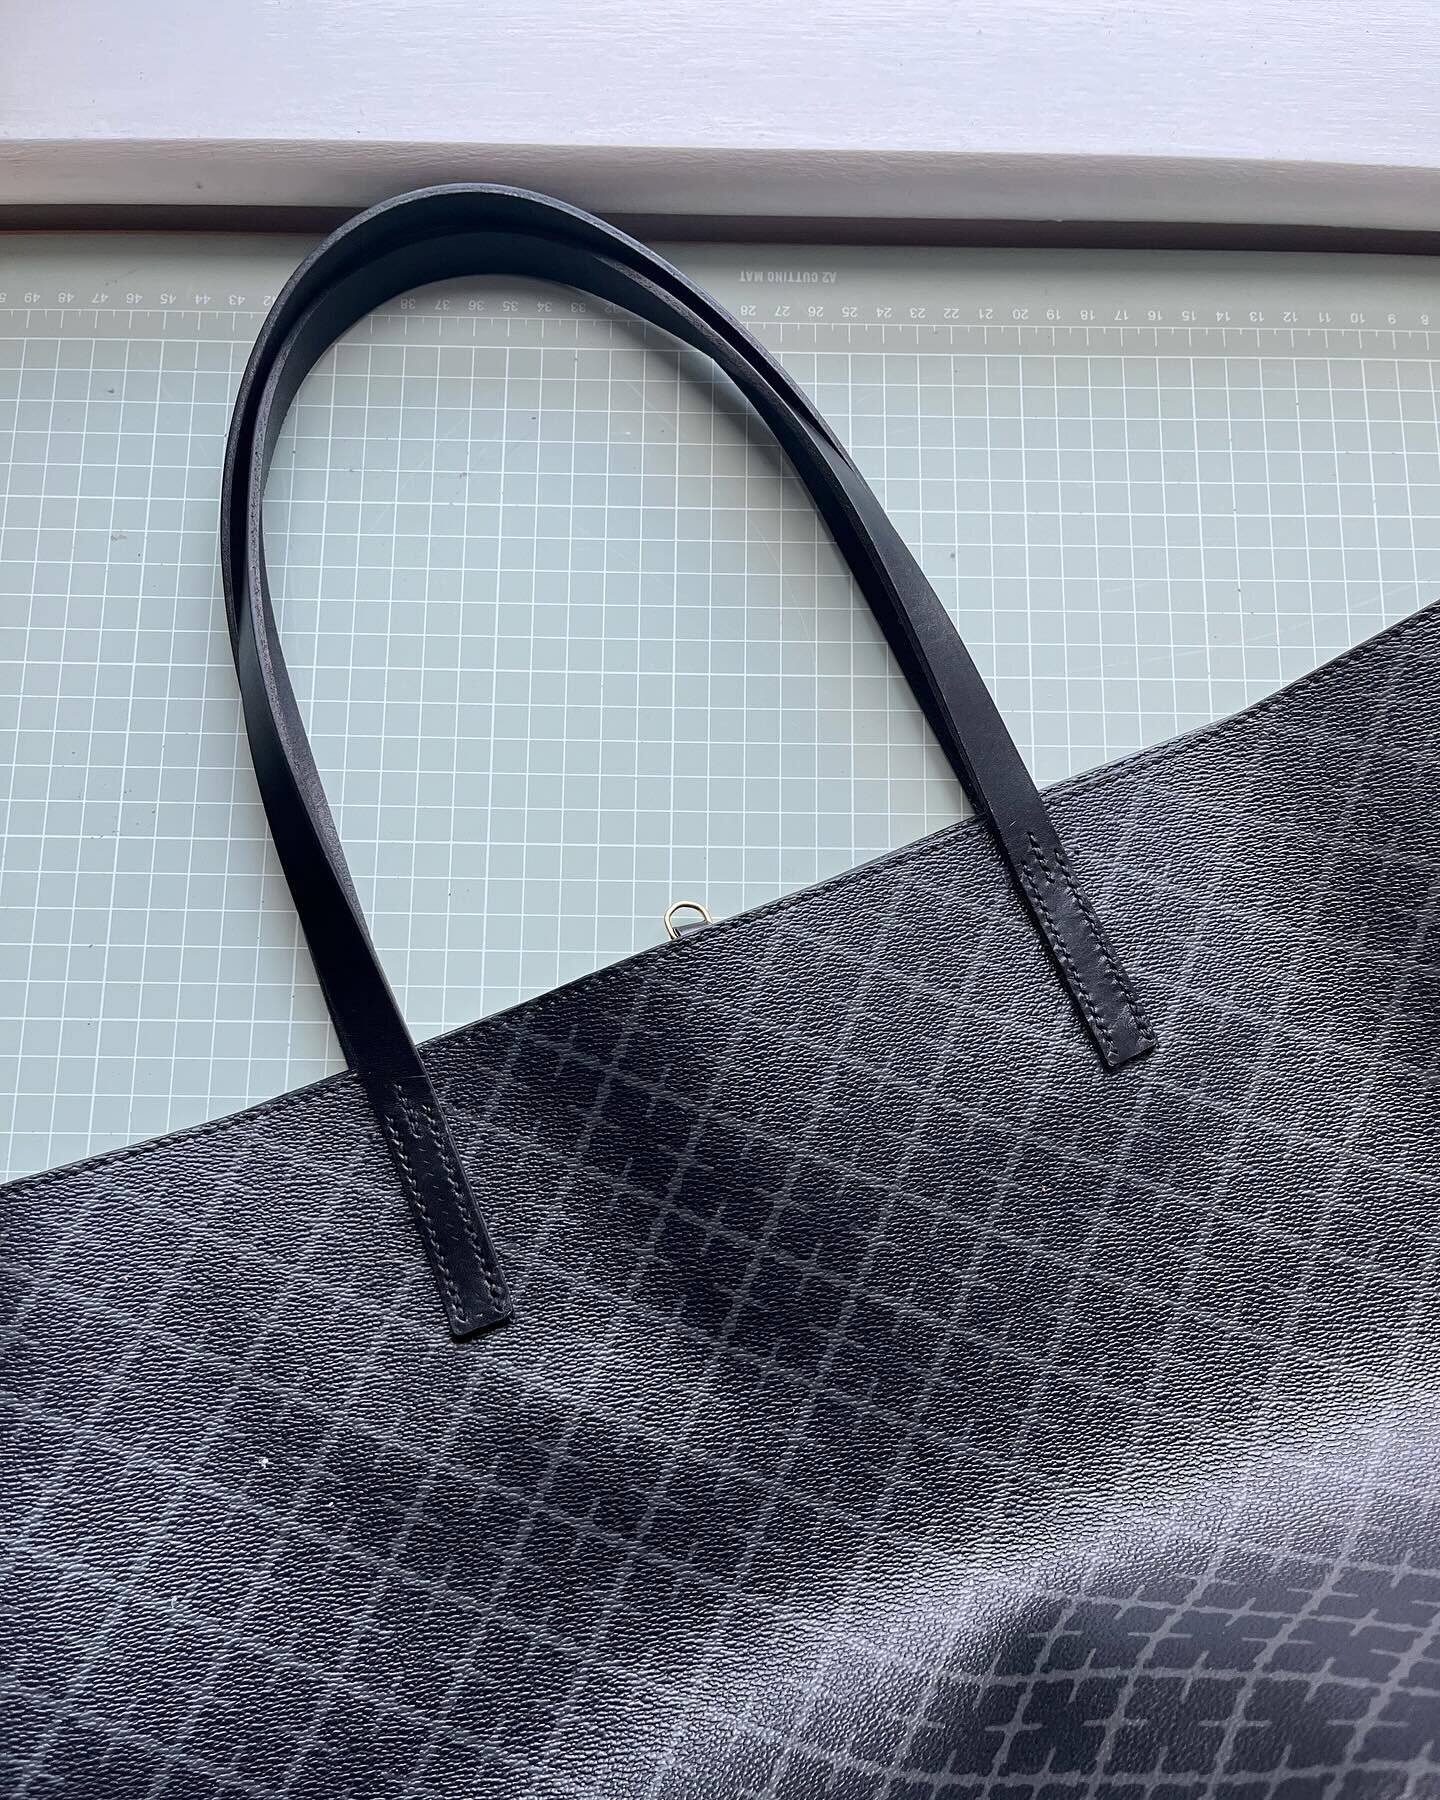 The original straps had snapped on this @bymalenebirger tote bag.  The customer had tried to re stitch them onto the bag which had worked a bit but they had now gone past anymore basic fixes.

I created new straps from a black Italian vegetable tanne